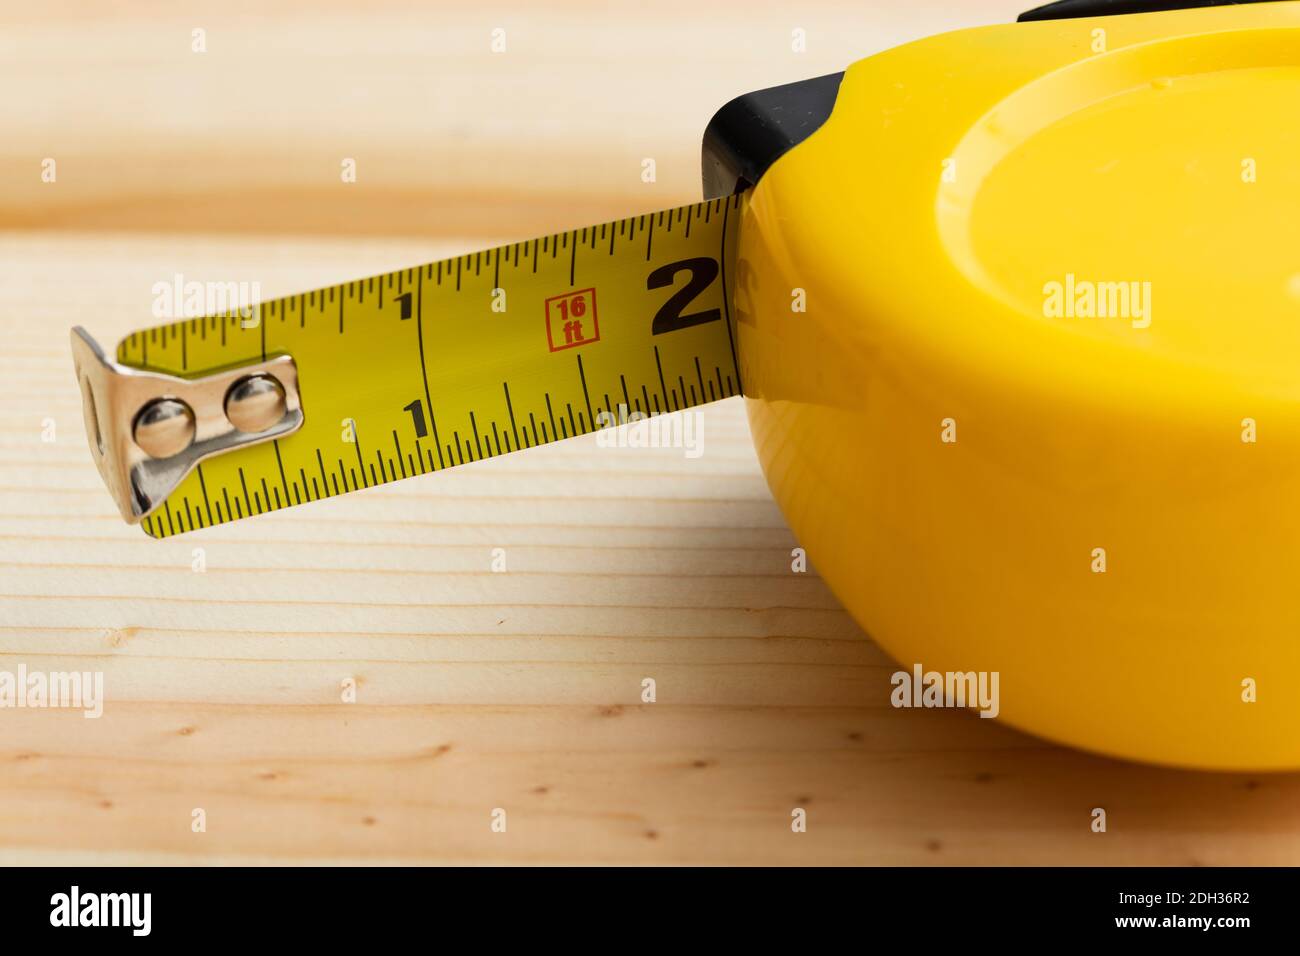 Tape measure laying on wood Stock Photo